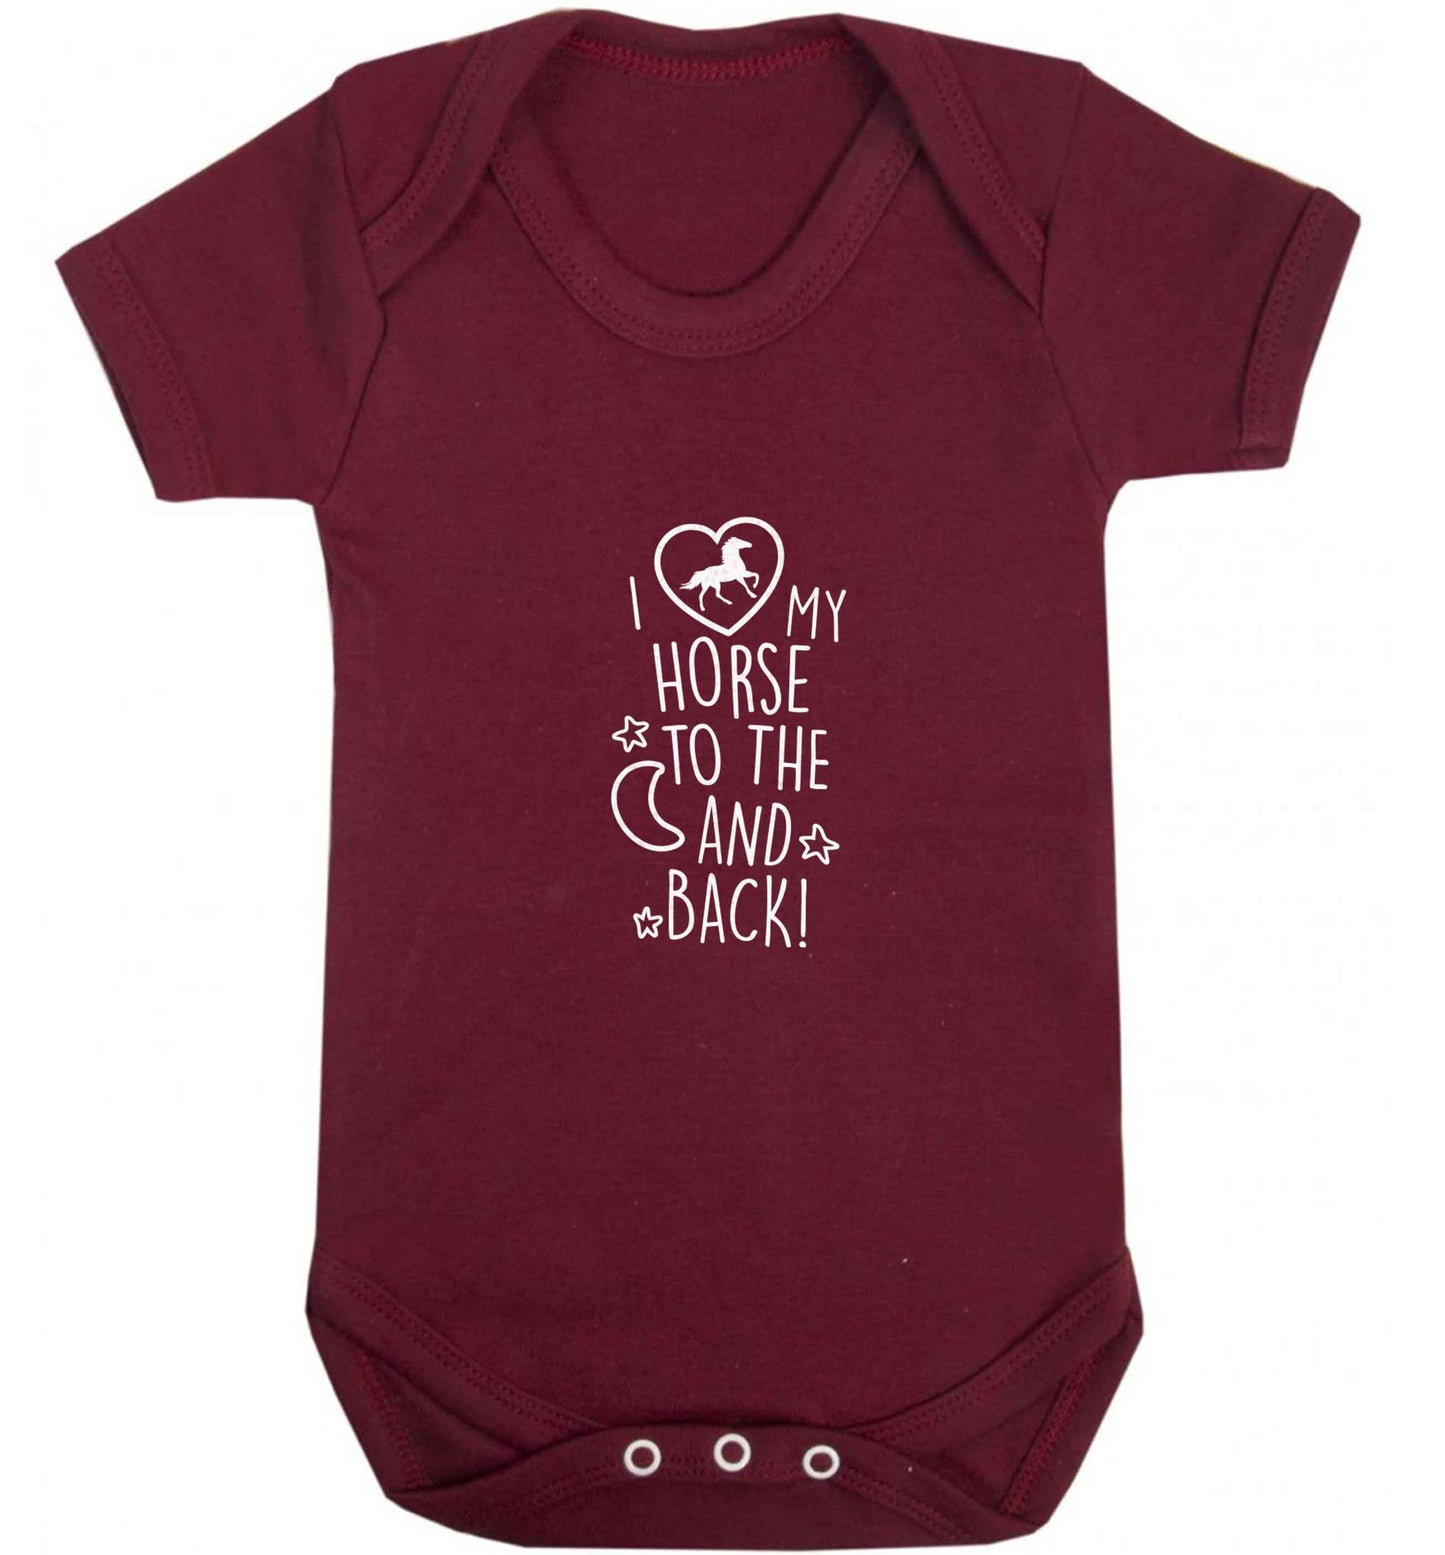 I love my horse to the moon and back baby vest maroon 18-24 months